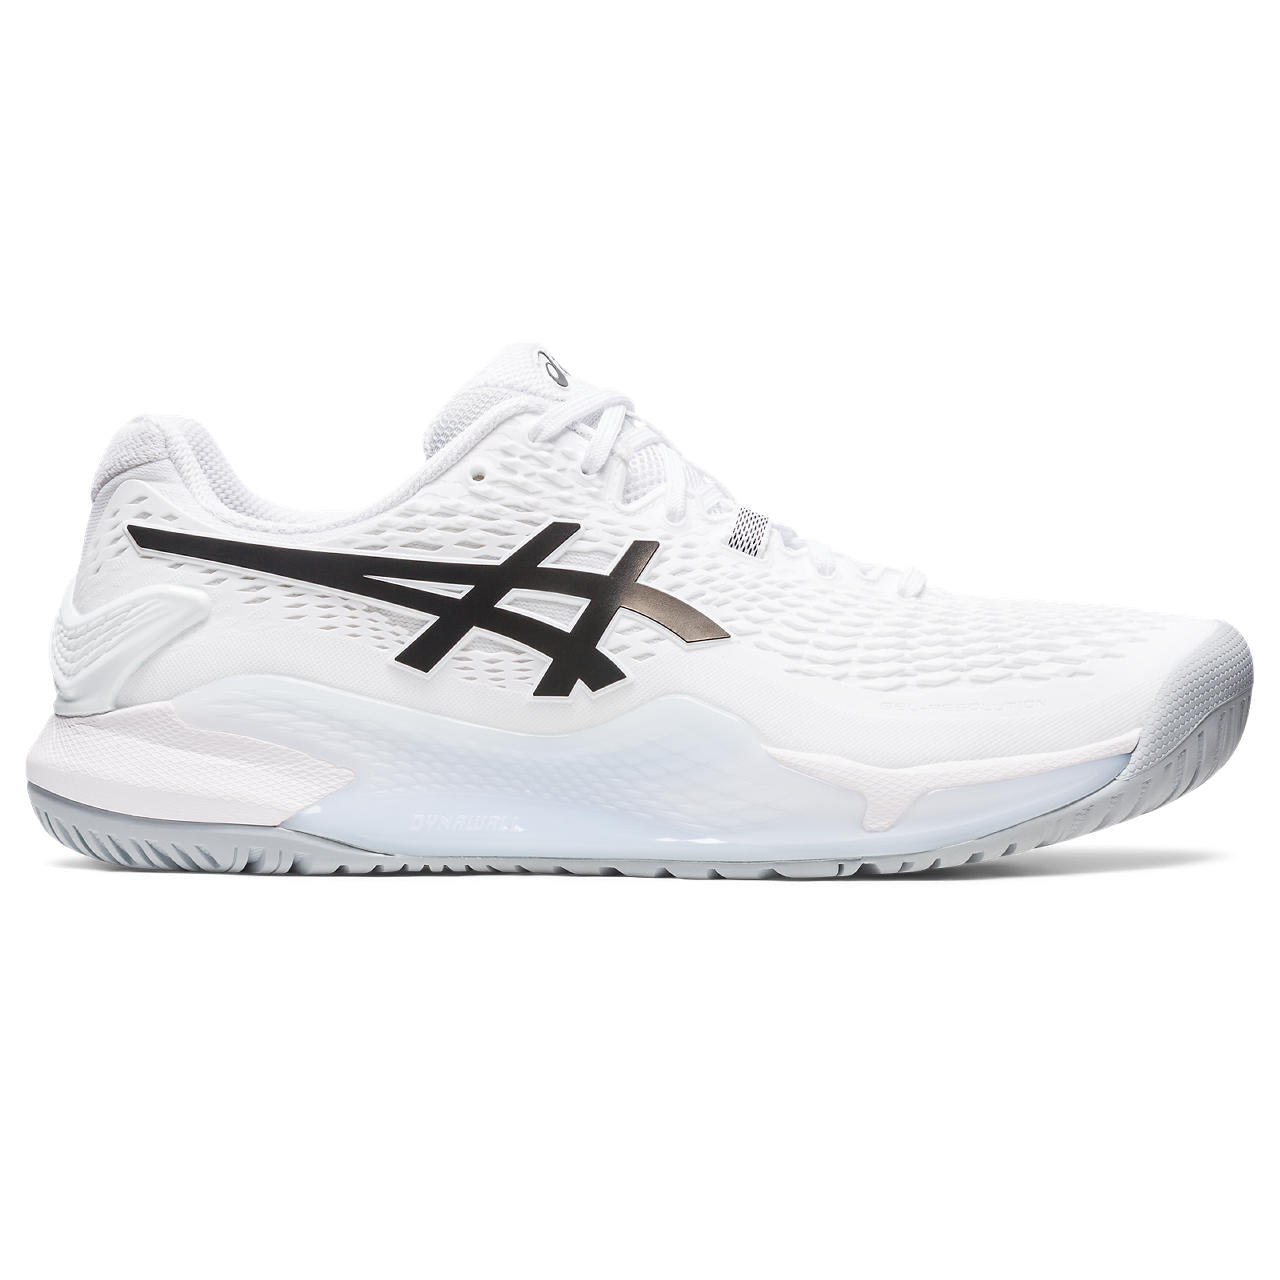 Lateral view of the ASIC Men's Resolution 9 tennis shoe in the color White/Black